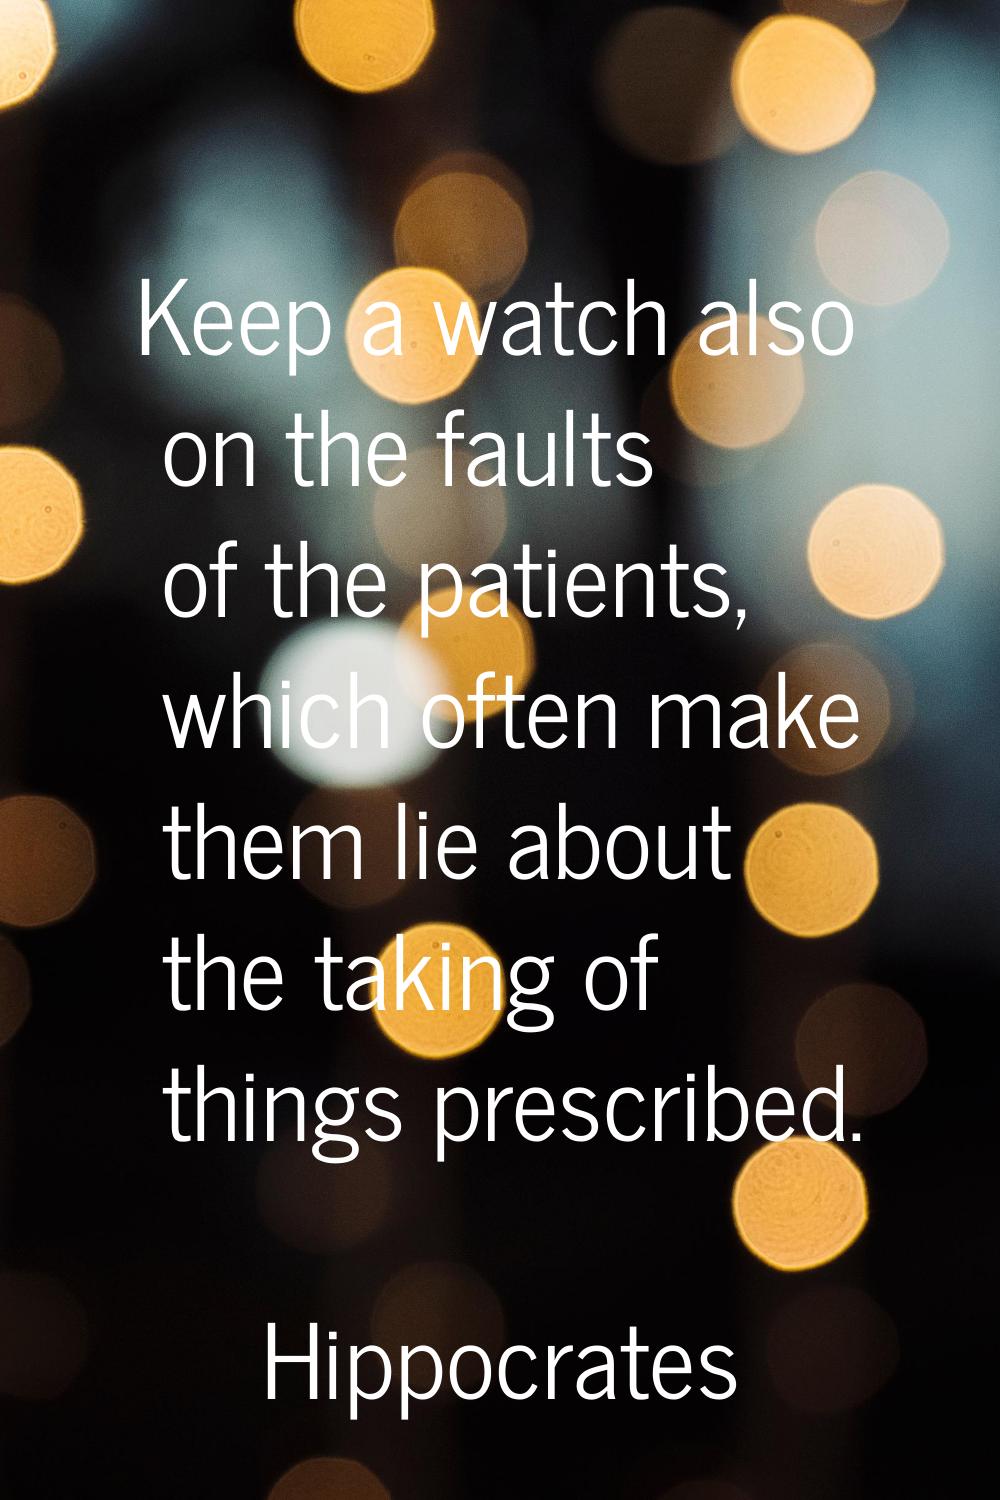 Keep a watch also on the faults of the patients, which often make them lie about the taking of thin